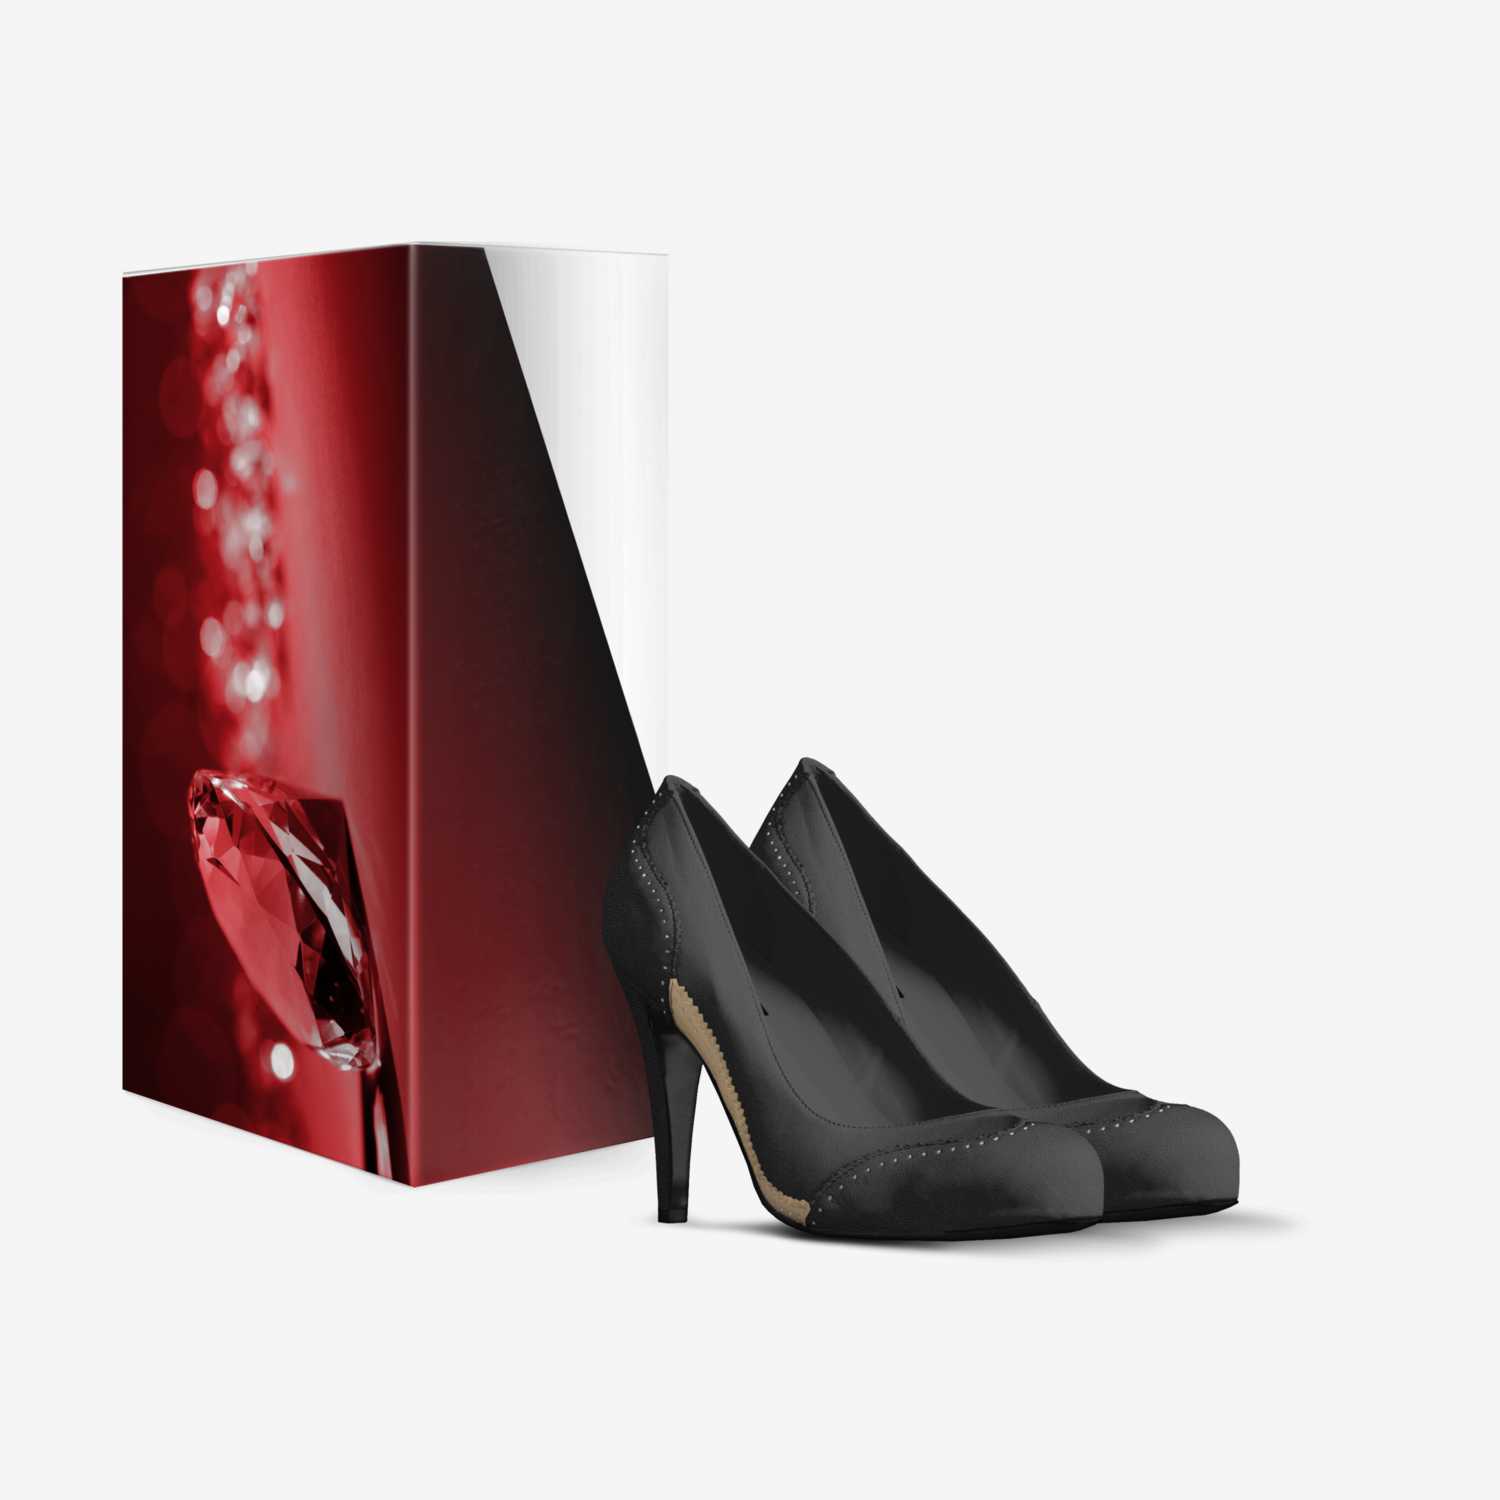 Red Diamond custom made in Italy shoes by Sophia Maybank | Box view